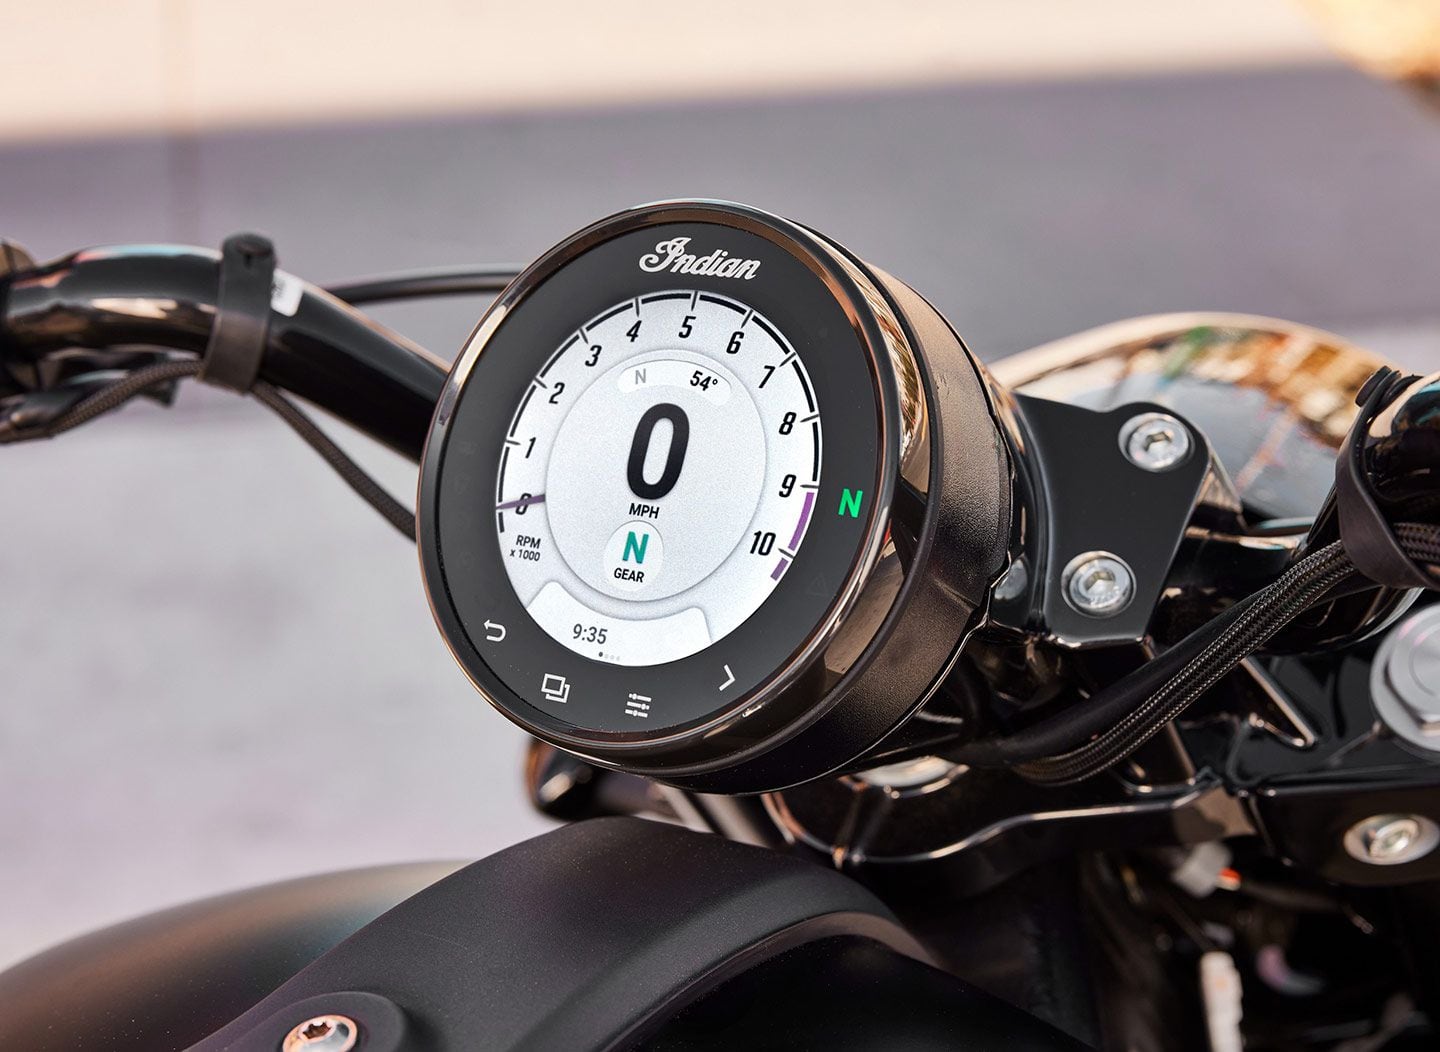 The Scout lineup gets a long-overdue tech update with the addition of the 4-inch TFT display and available ride modes on select models.